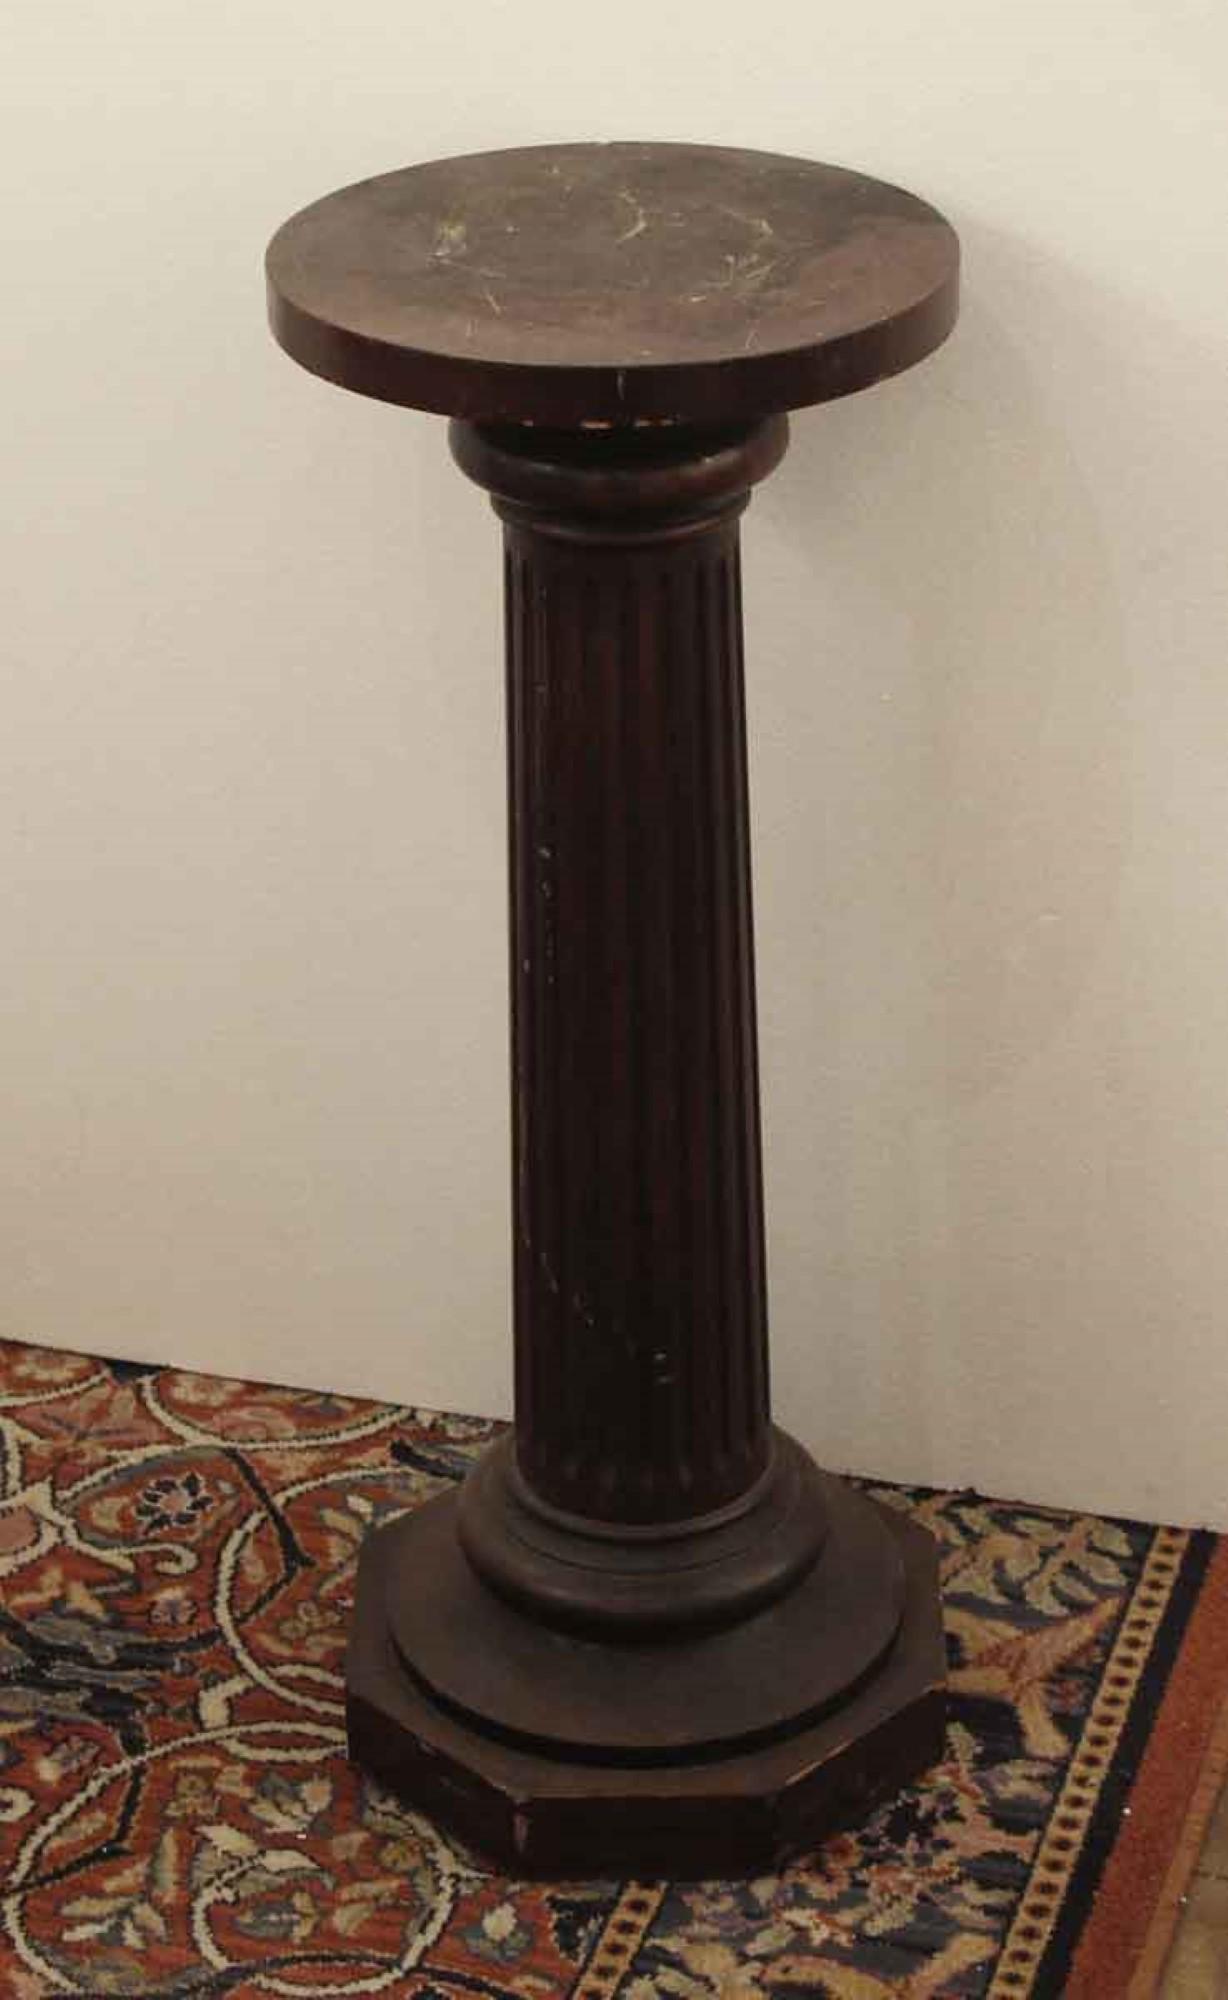 1920s dark wood tone pedestal with a round top. There is some wear in the wood from age and use. This can be seen at our 2420 Broadway location on the upper west side in Manhattan.